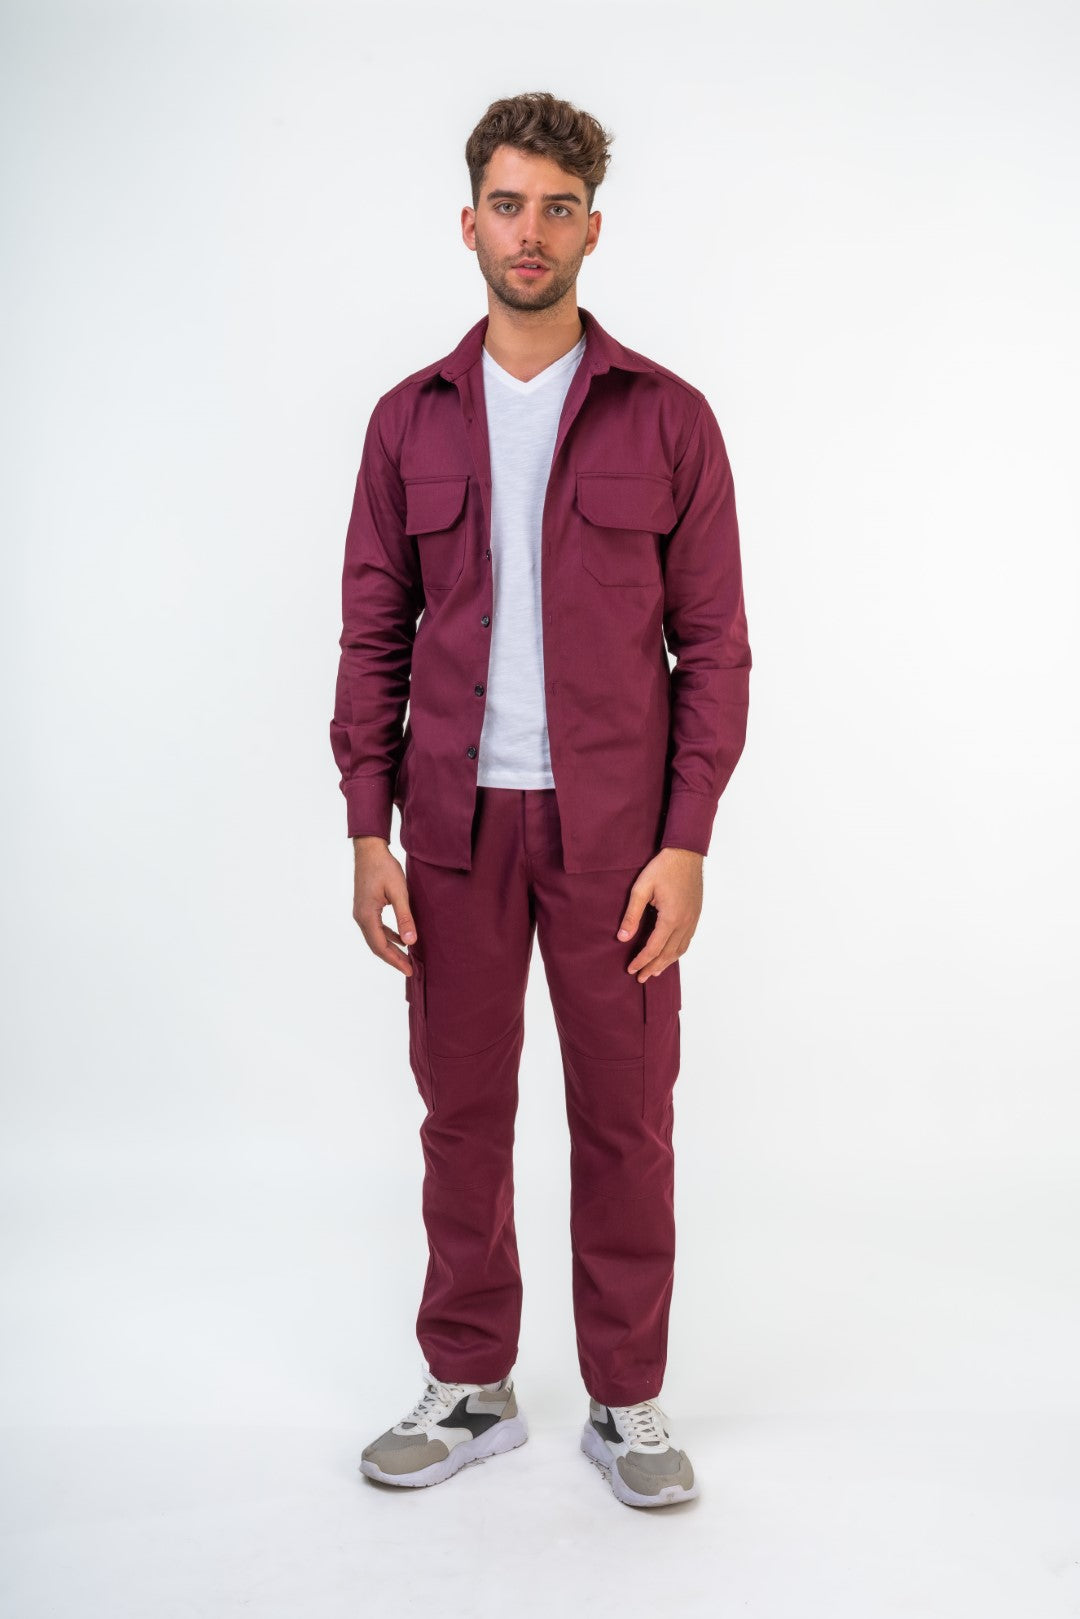 Cargo Trousers with Side Pockets